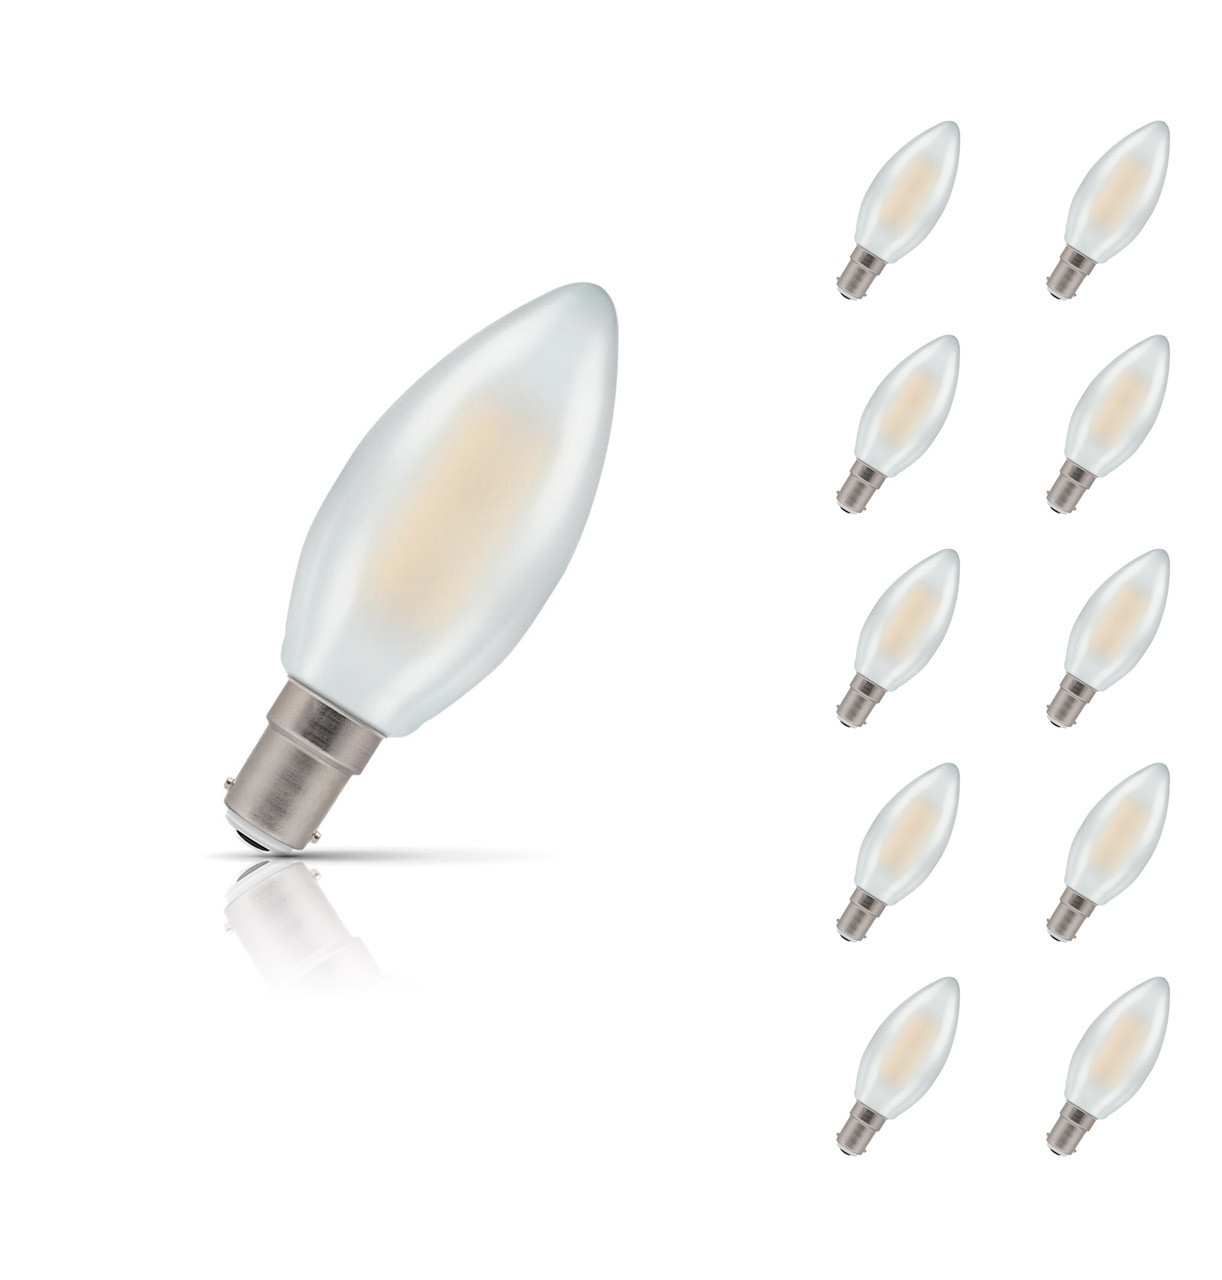 Photos - Light Bulb Crompton Candle LED  Dimmable B15 5W  Warm White 10-Pac (40W Eqv)